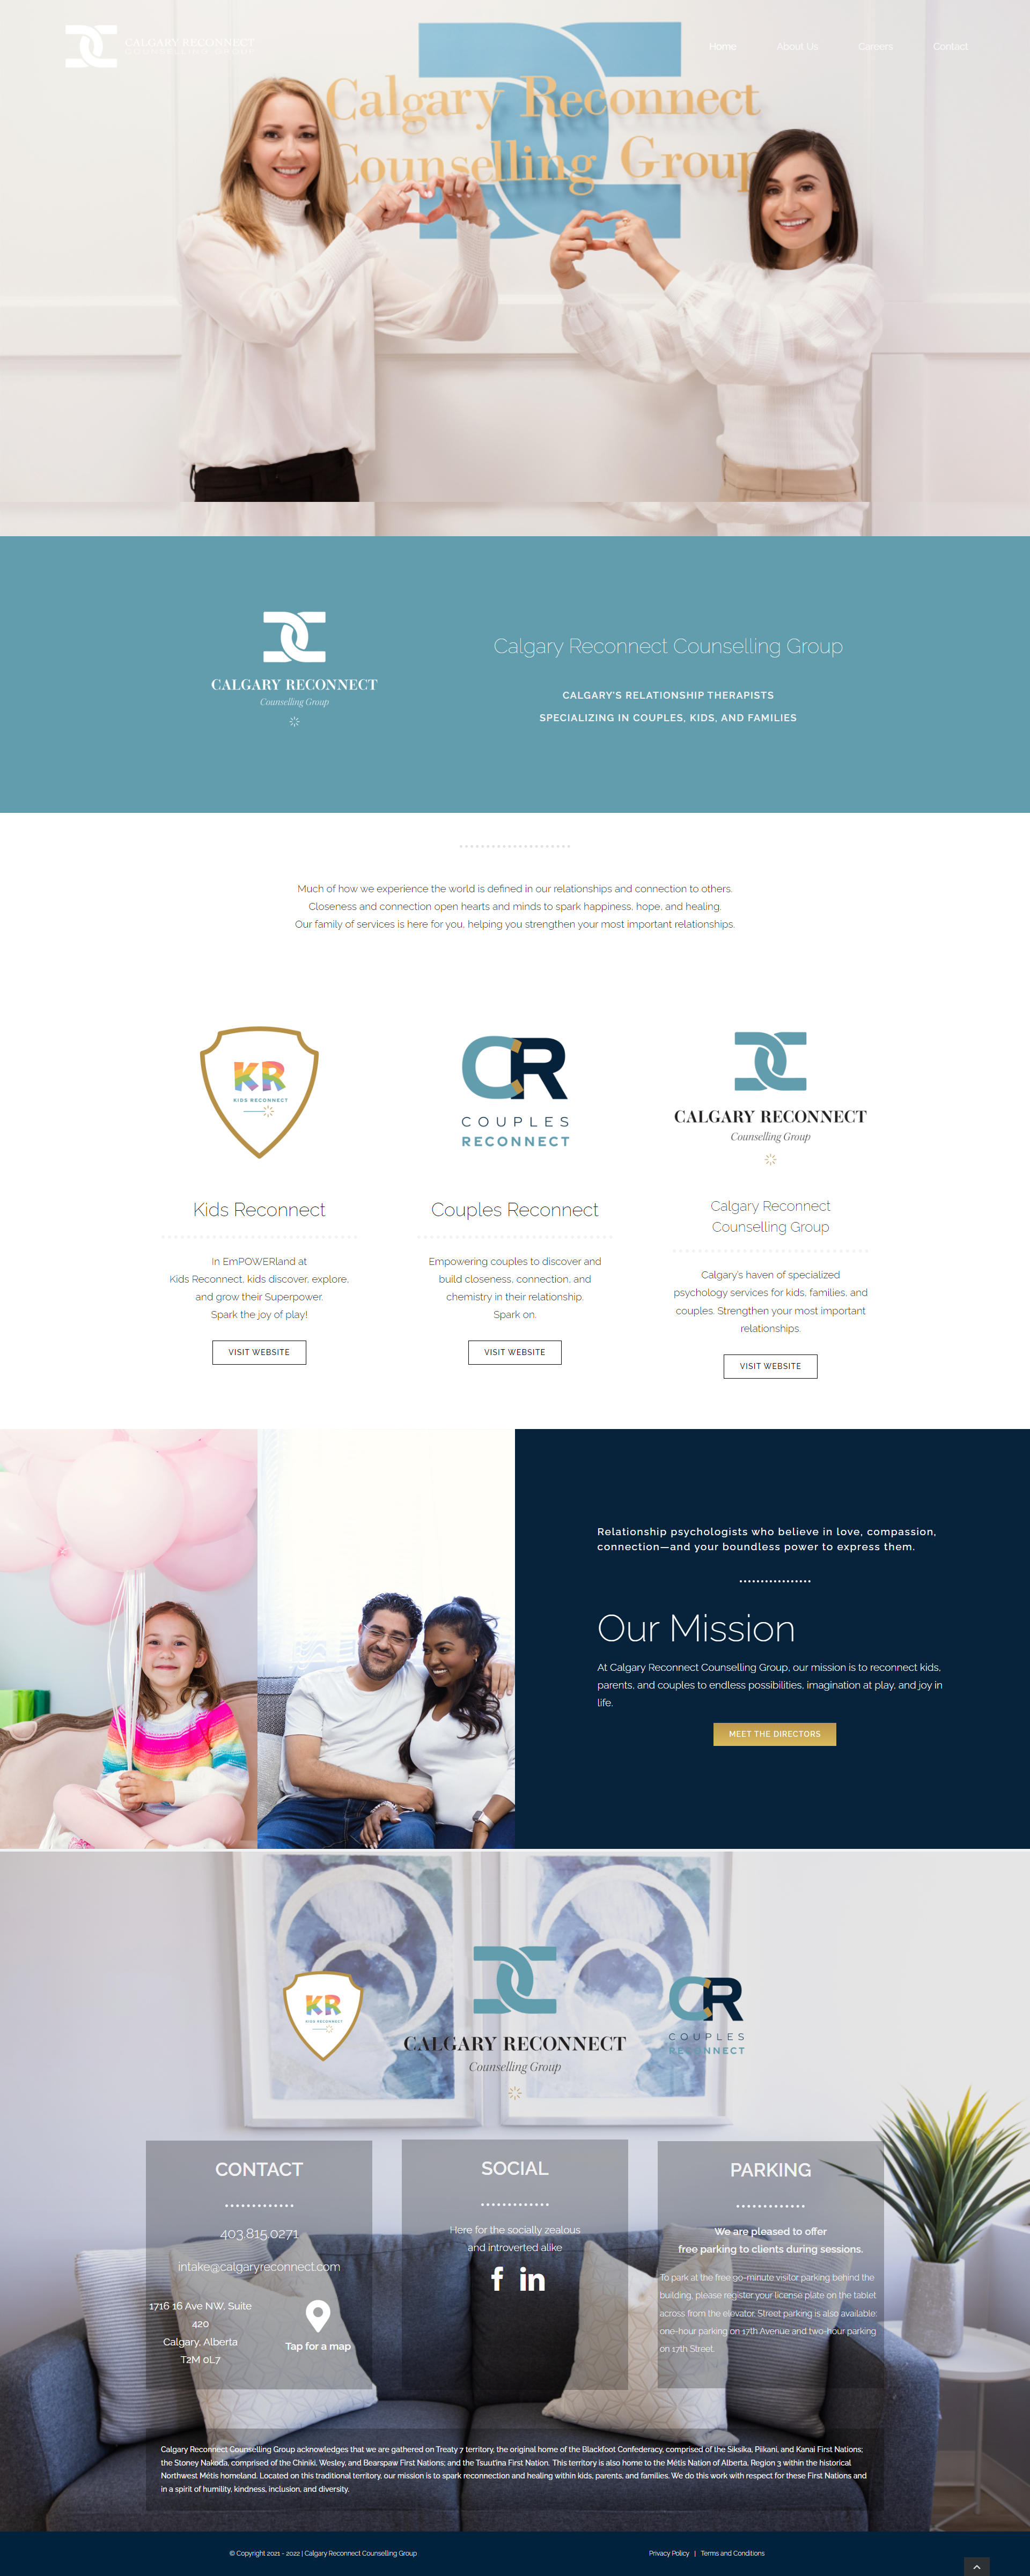 Website Design for Calgary Reconnect Counselling Group